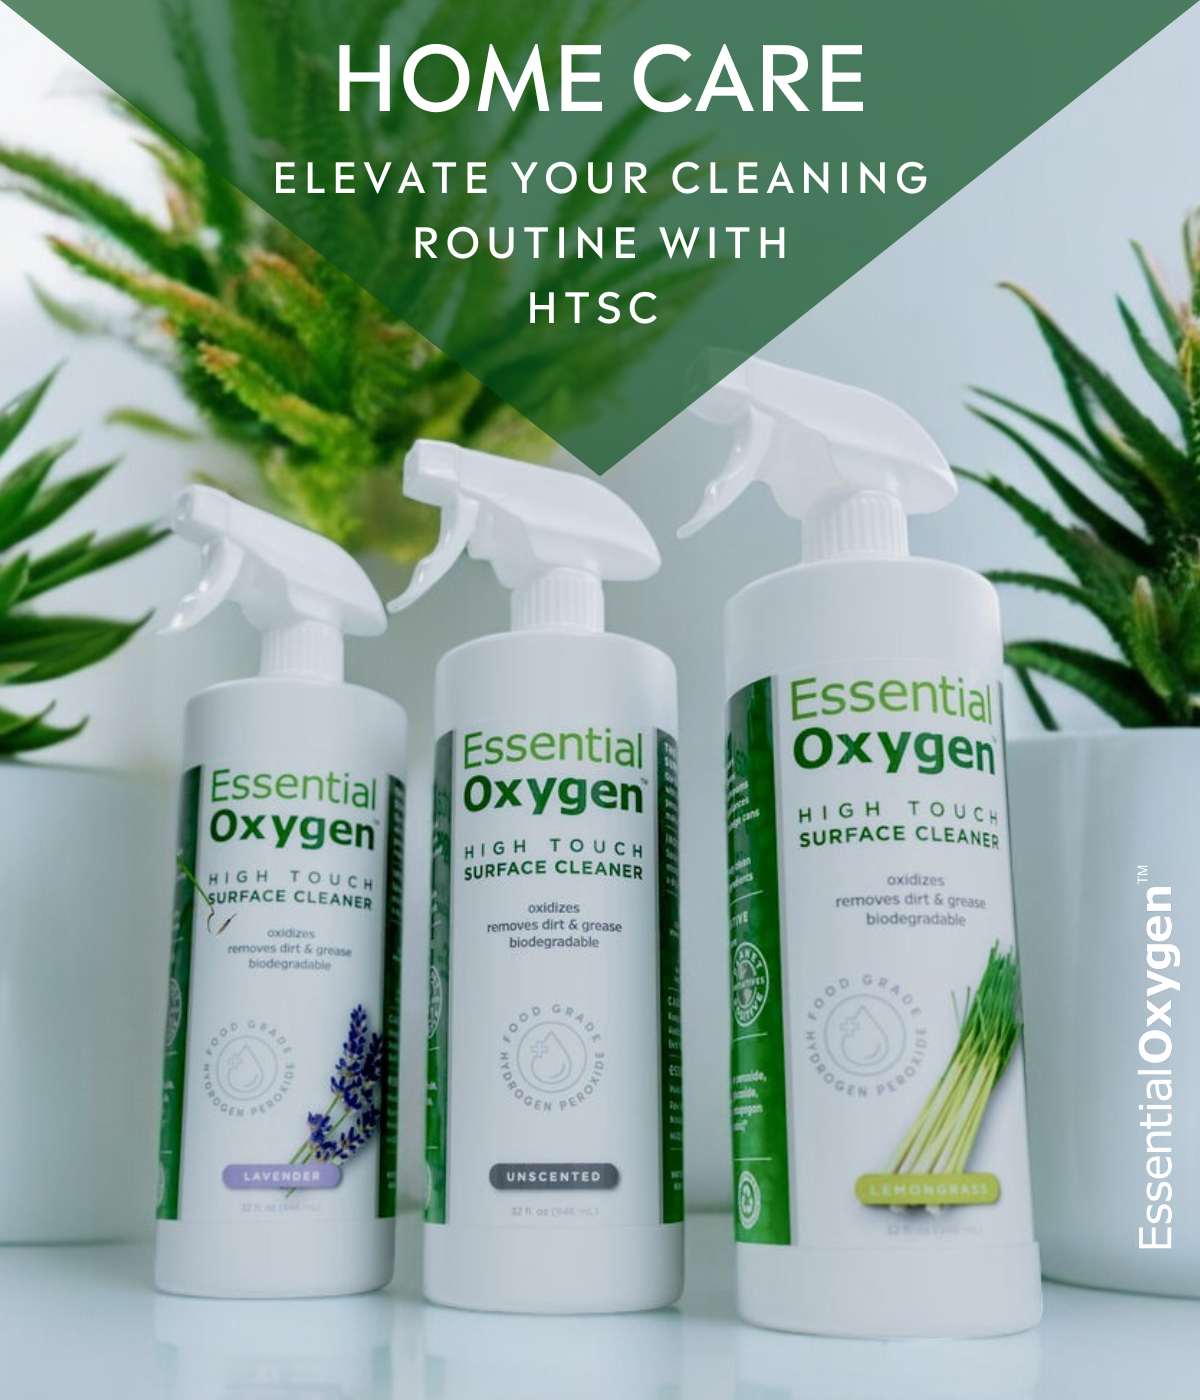 Essential Oxygen | Elevate Your Home Cleaning Routine with High Touch Surface Cleaner | 3 Spray Bottles of Essential Oxygen High Touch Surface Cleaner on White Counter with Succulent Plants in the Background